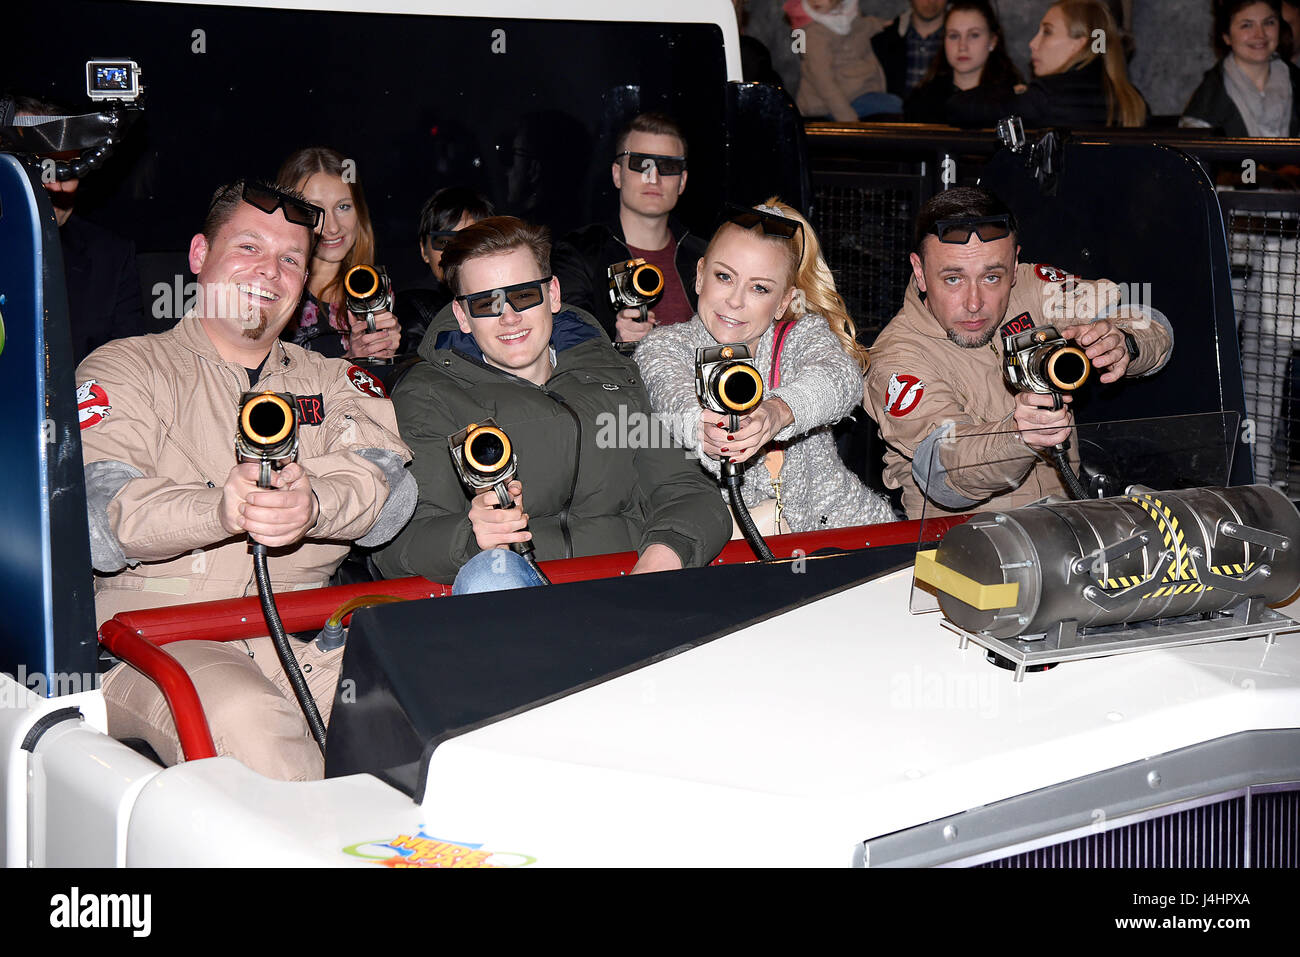 Unveiling of the new Heide Park attraction 'Ghostbusters 5D' at Heide Park Resort.  Featuring: Jenny Elvers, Paul Jolig Where: Soltau, Germany When: 11 Apr 2017 Credit: WENN.com Stock Photo